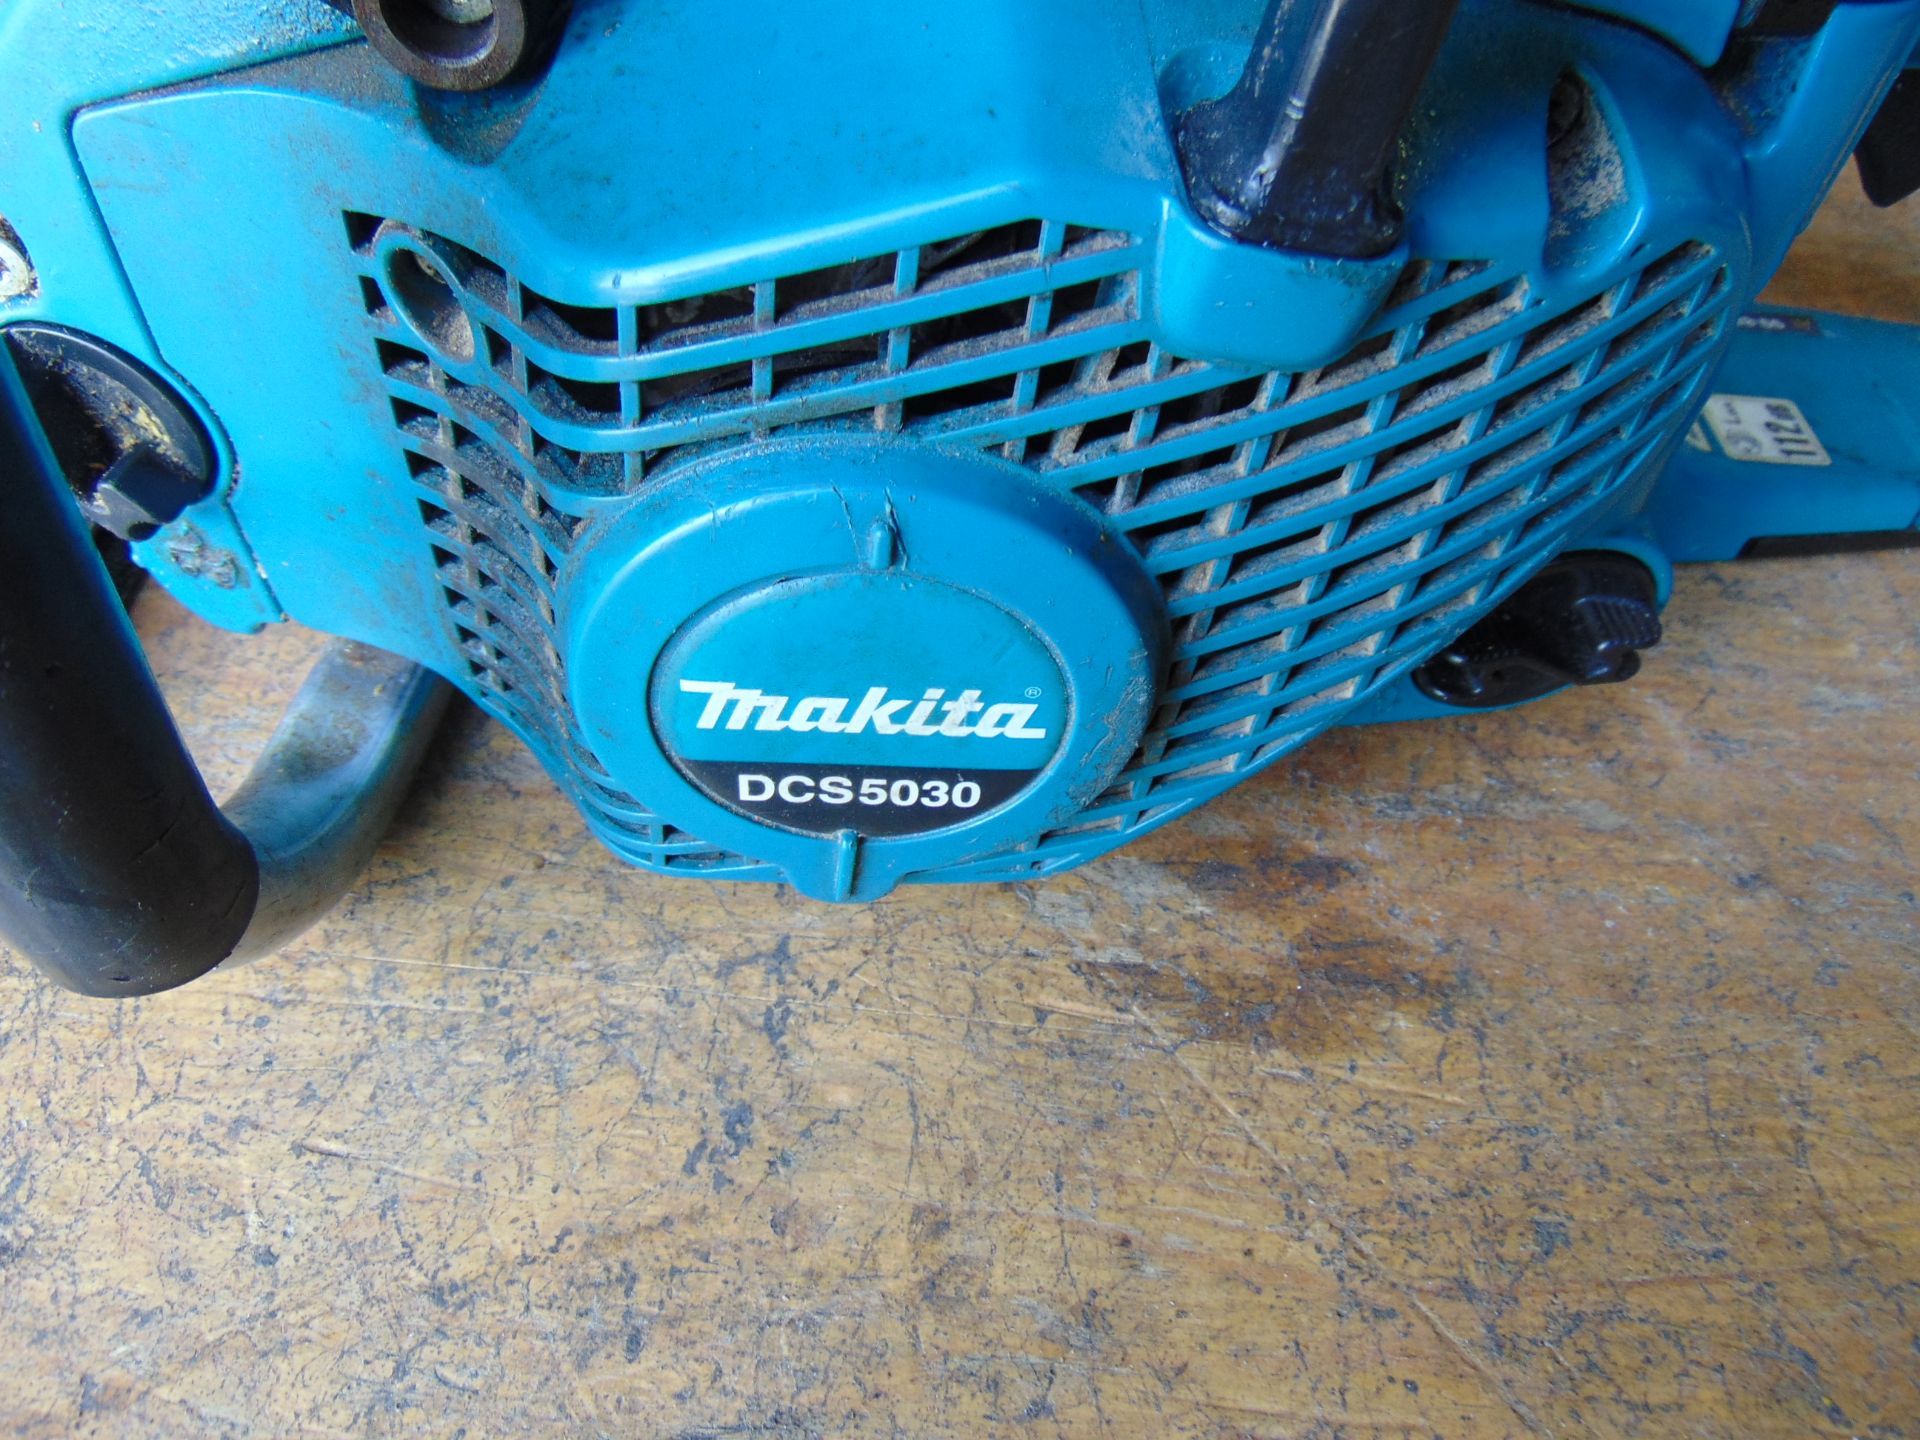 MAKITA DCS 5030 50CC Chainsaw c/w Chain Guard from MoD. - Image 4 of 6